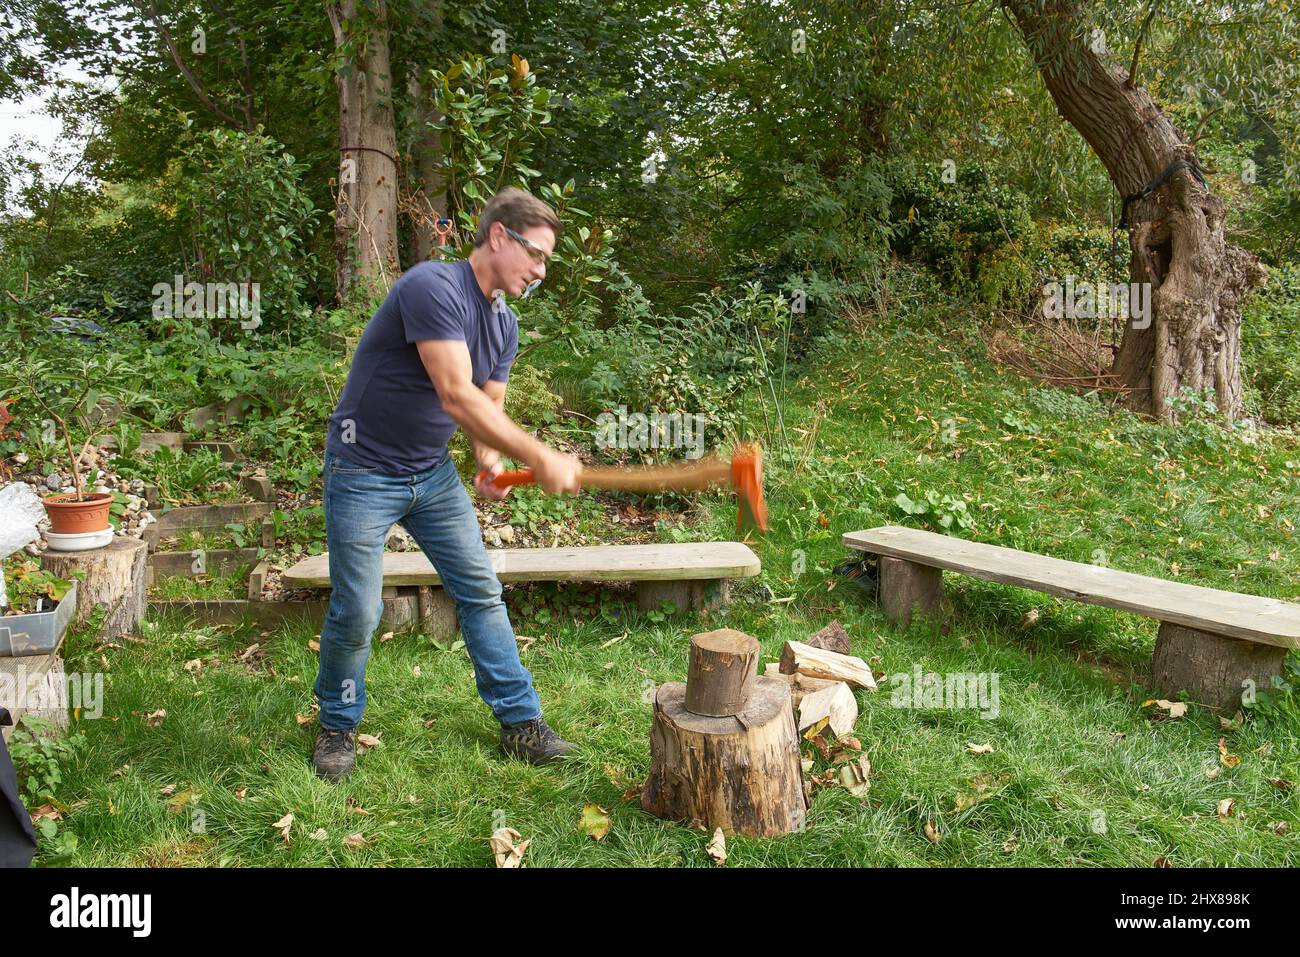 Splitting wood axe step-by-step Stock Photo